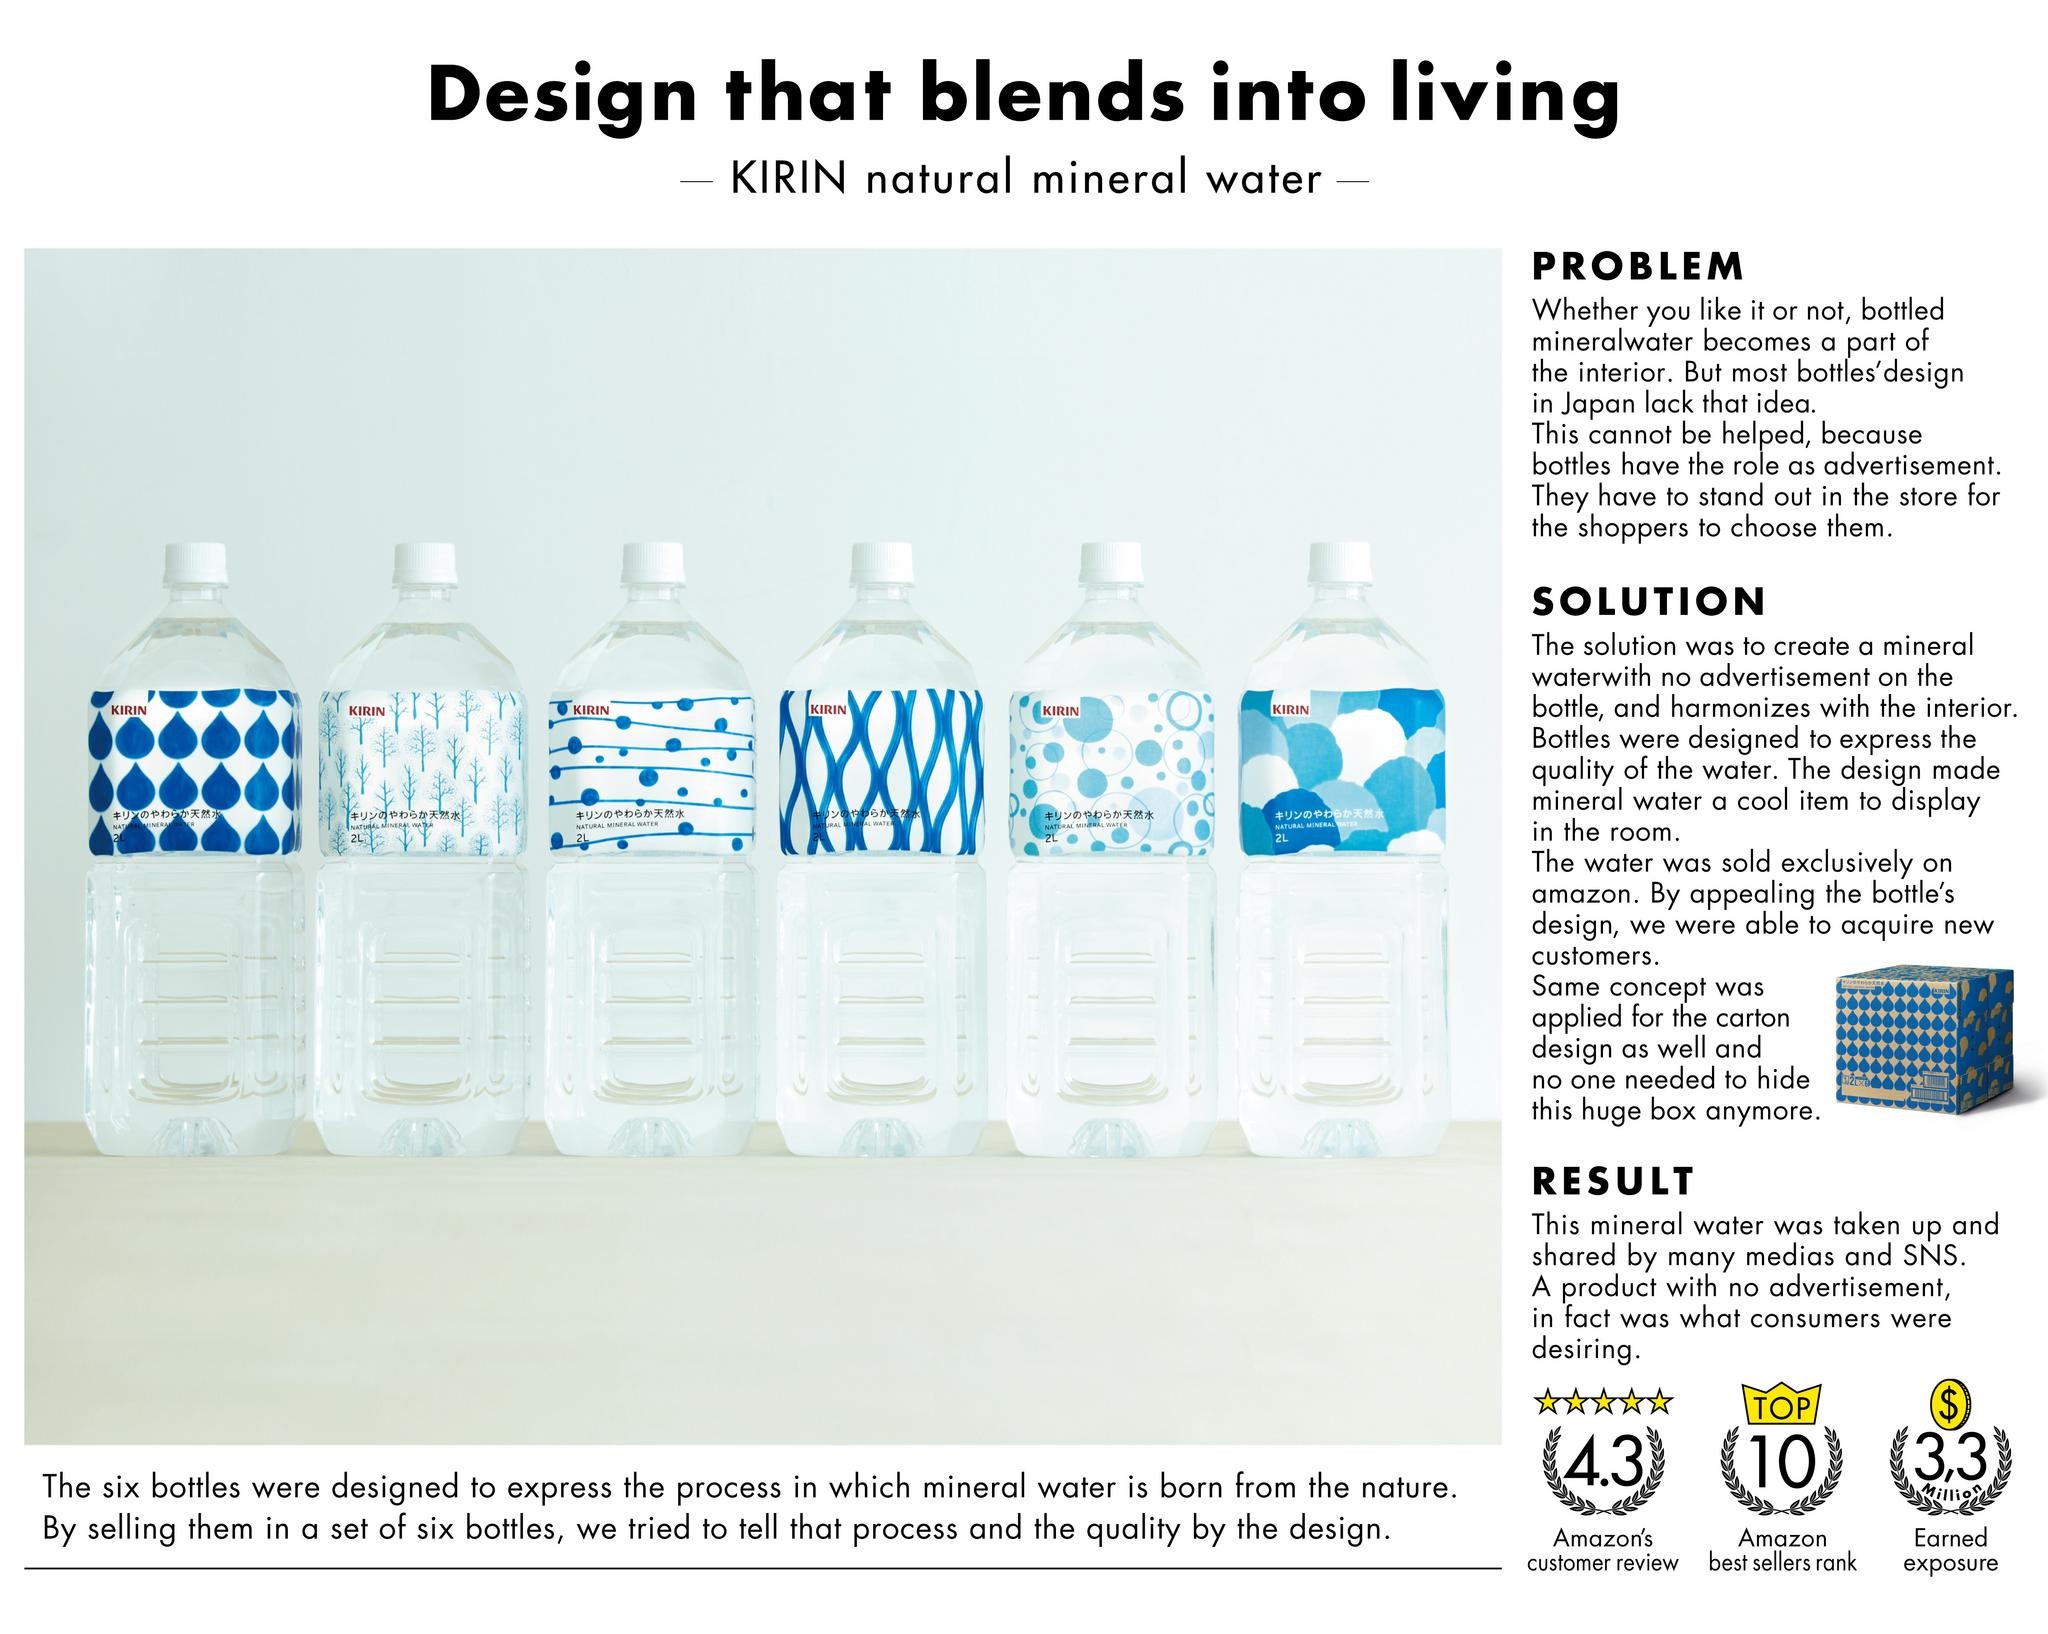 DESIGN THAT BLENDS INTO LIVING